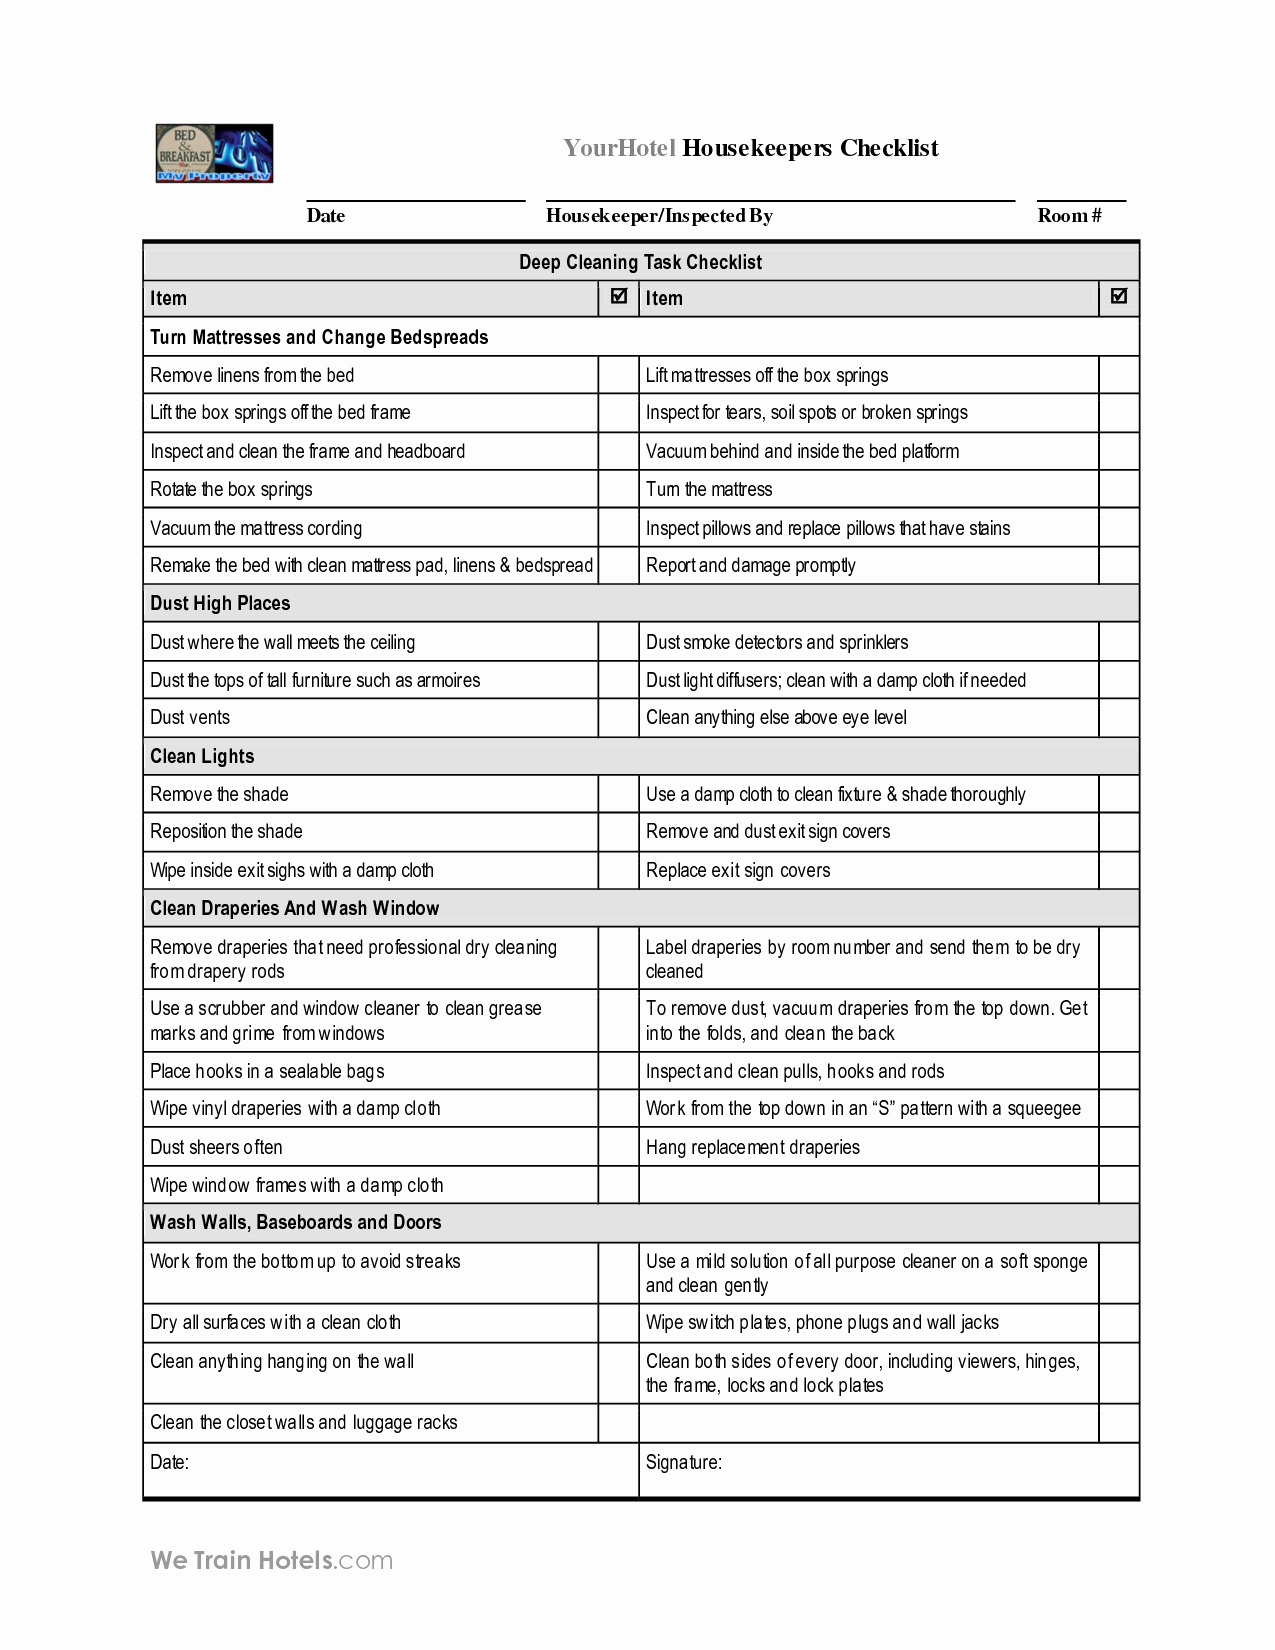 Deep Cleaning Checklist for Housekeeper Unique 9 Best Of Hotel Housekeeping Checklist Printable